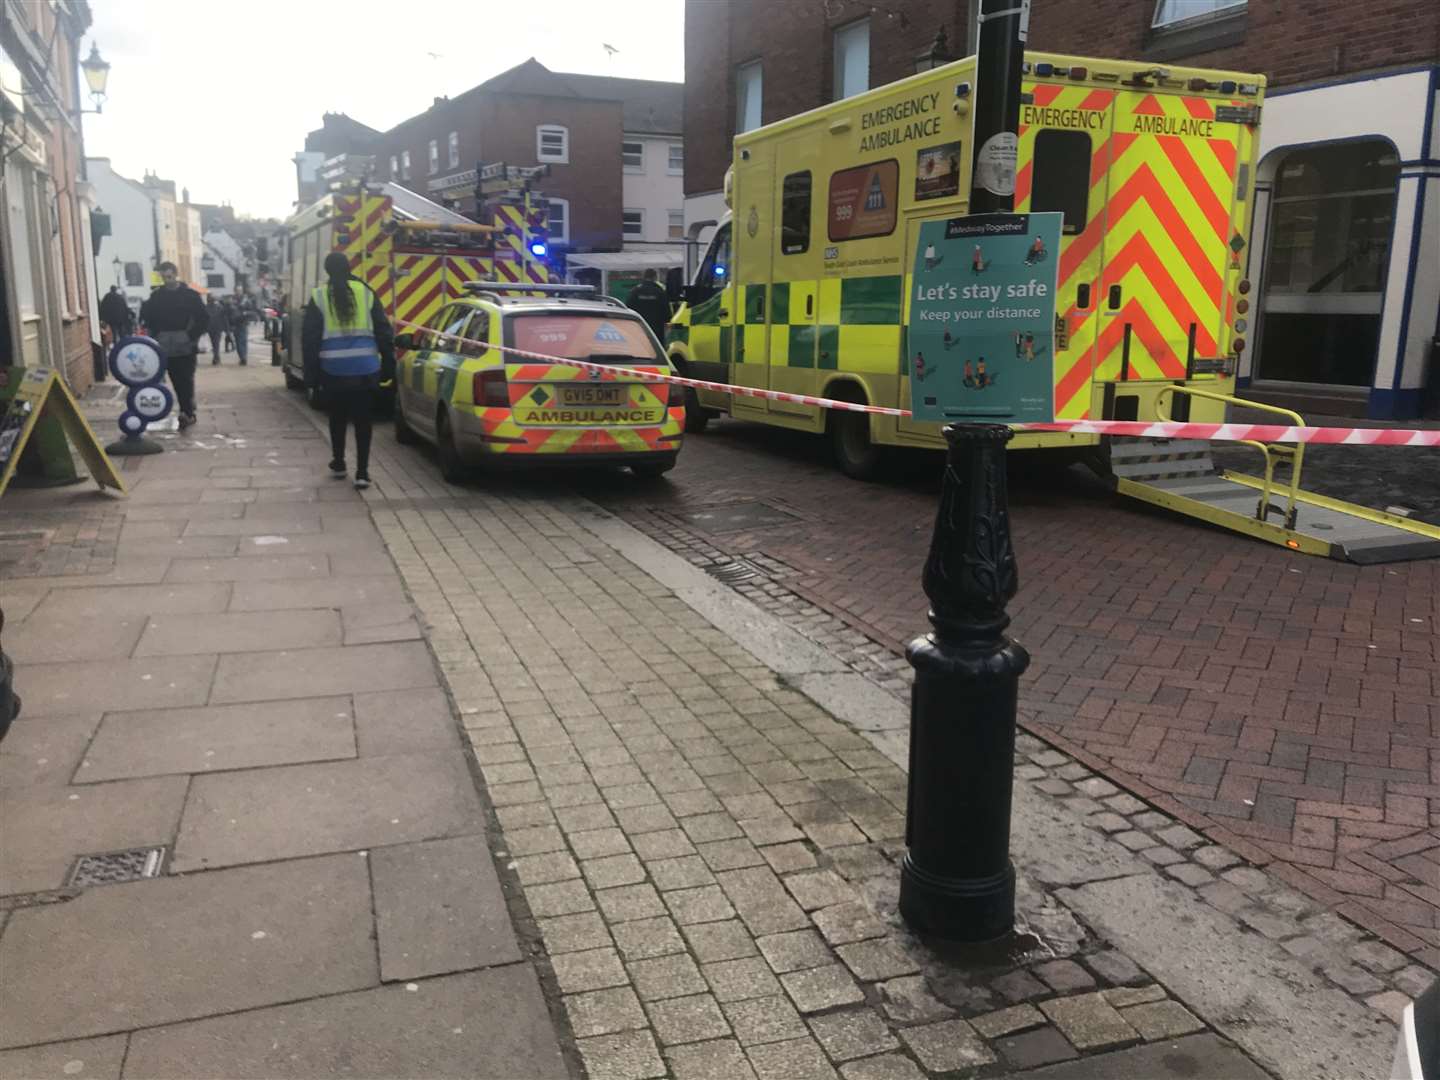 Paramedics and fire crews have been called to the scene